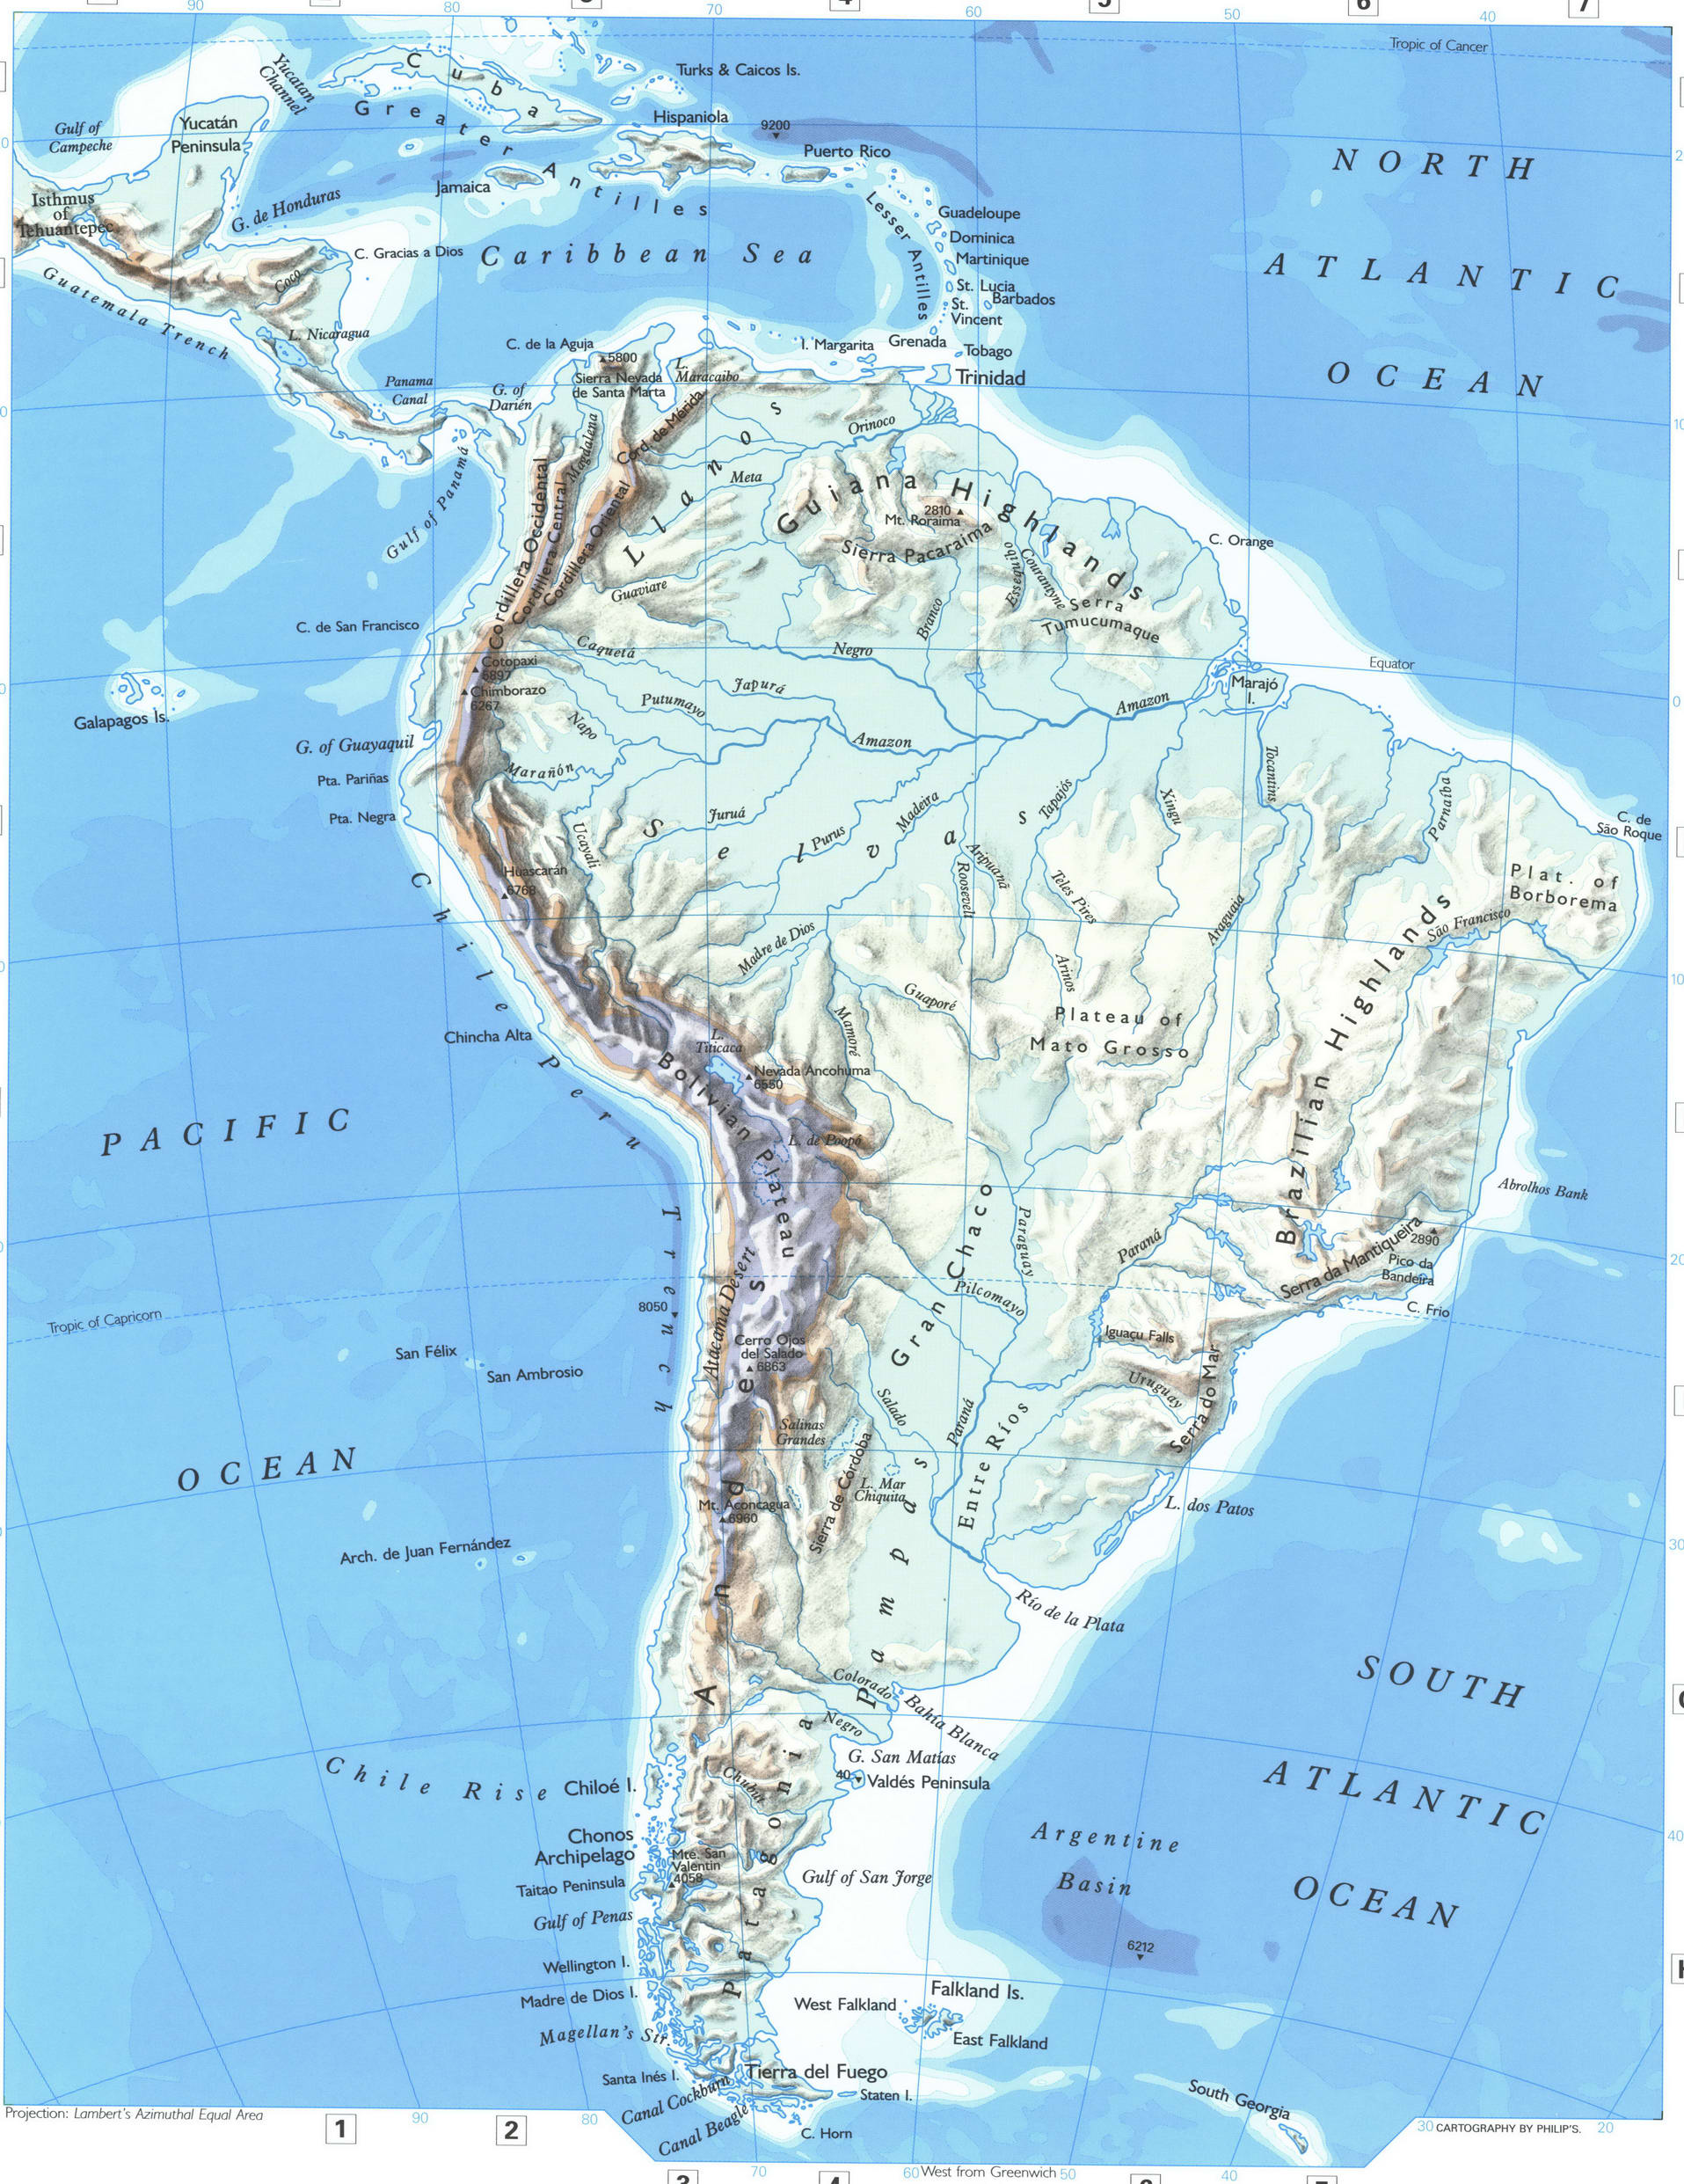 South America physical map